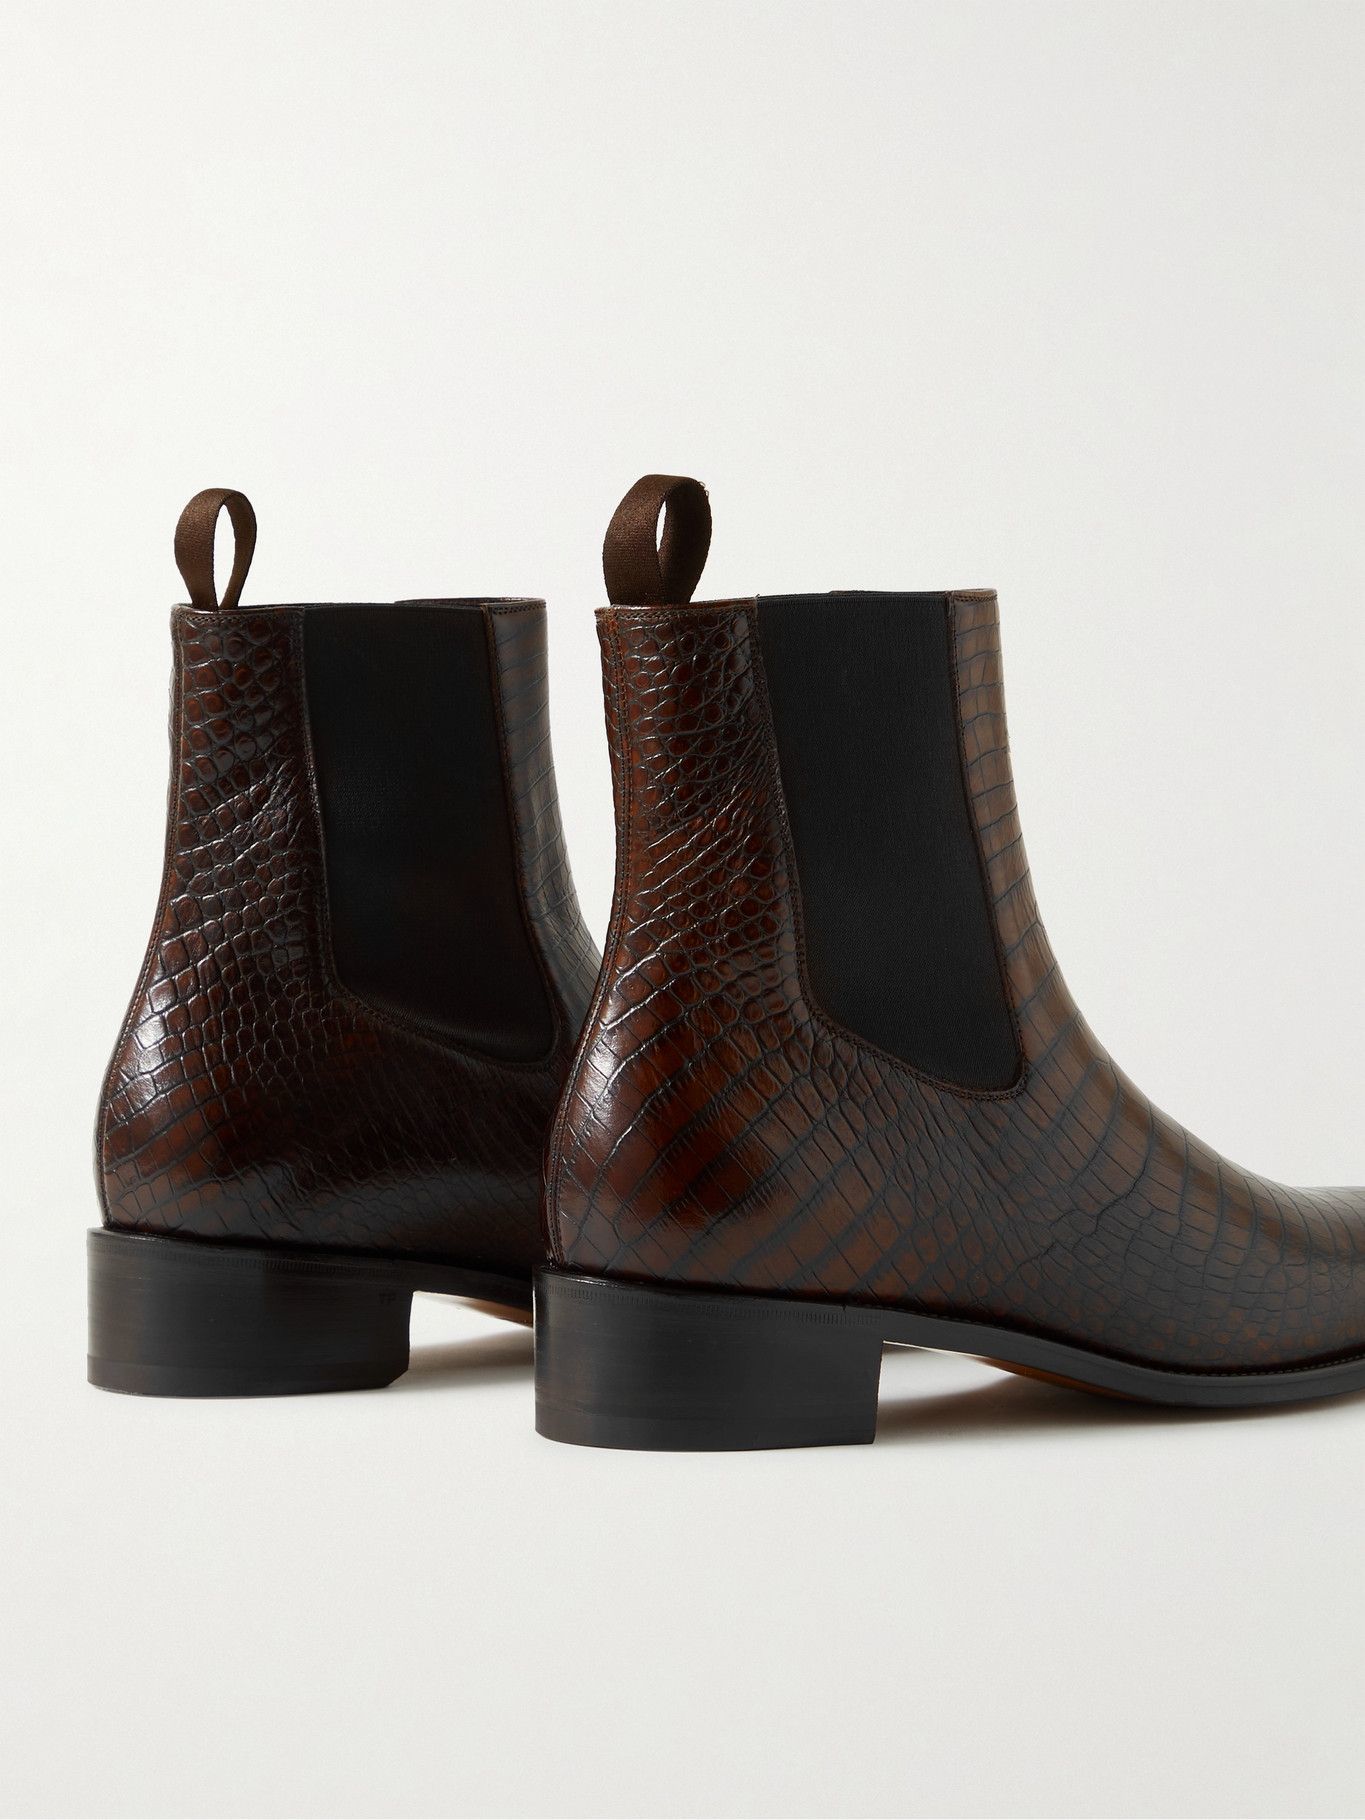 TOM FORD - Croc-Effect Leather Chelsea Boots - Brown TOM FORD